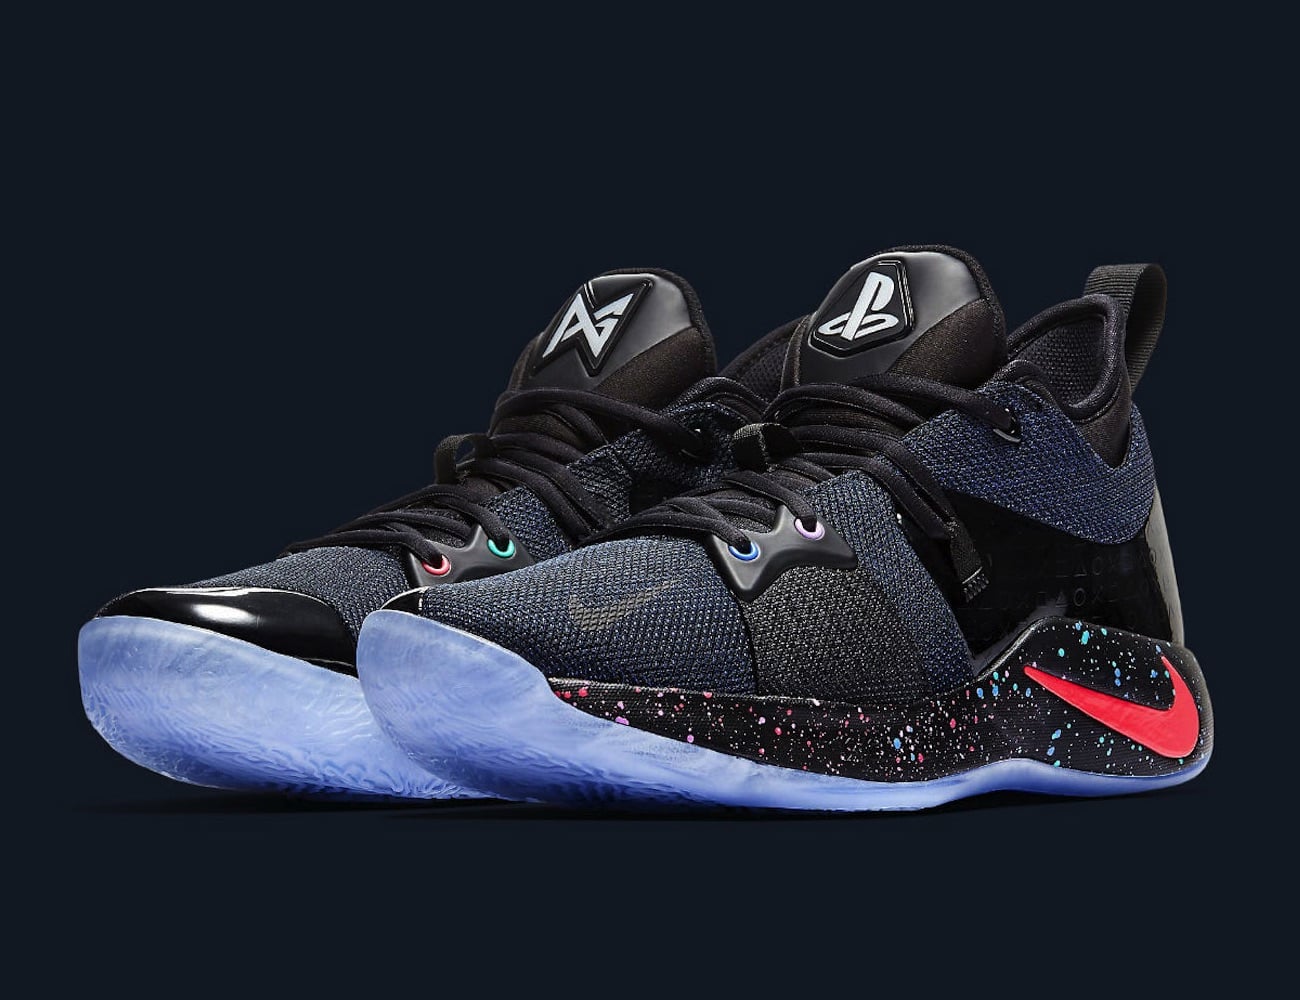 Nike PG2 PlayStation Shoes celebrate basketball star Paul George’s love for the PS4